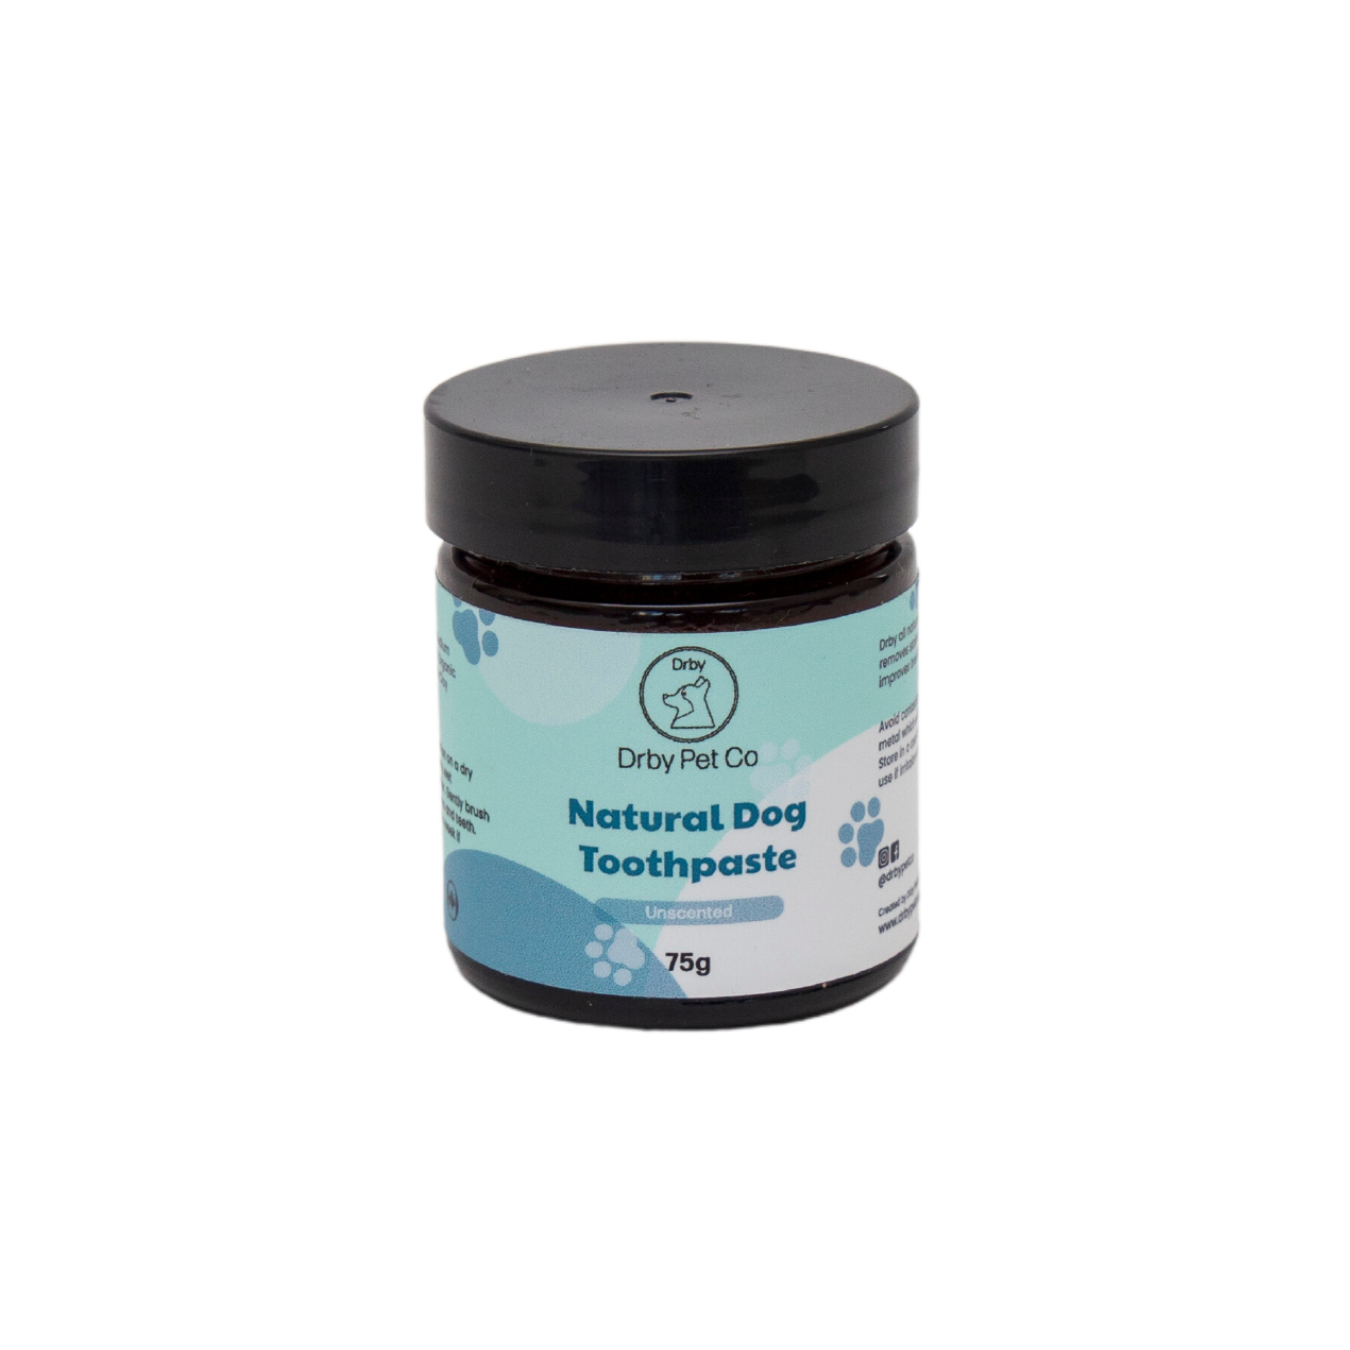 Natural Dog Toothpaste